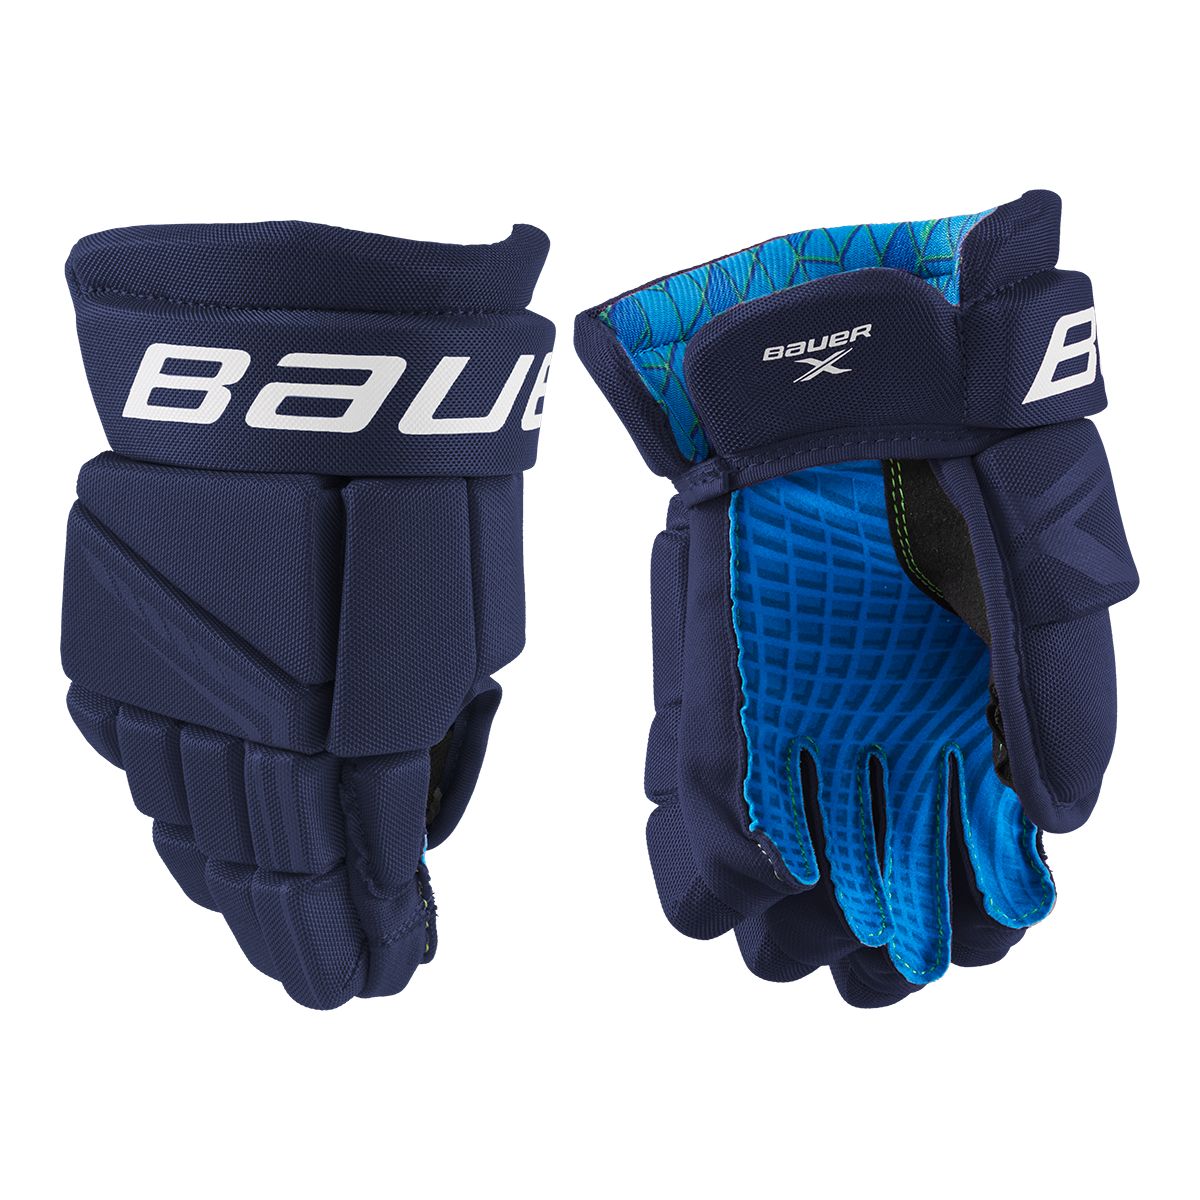 Image of Bauer X Youth Hockey Gloves